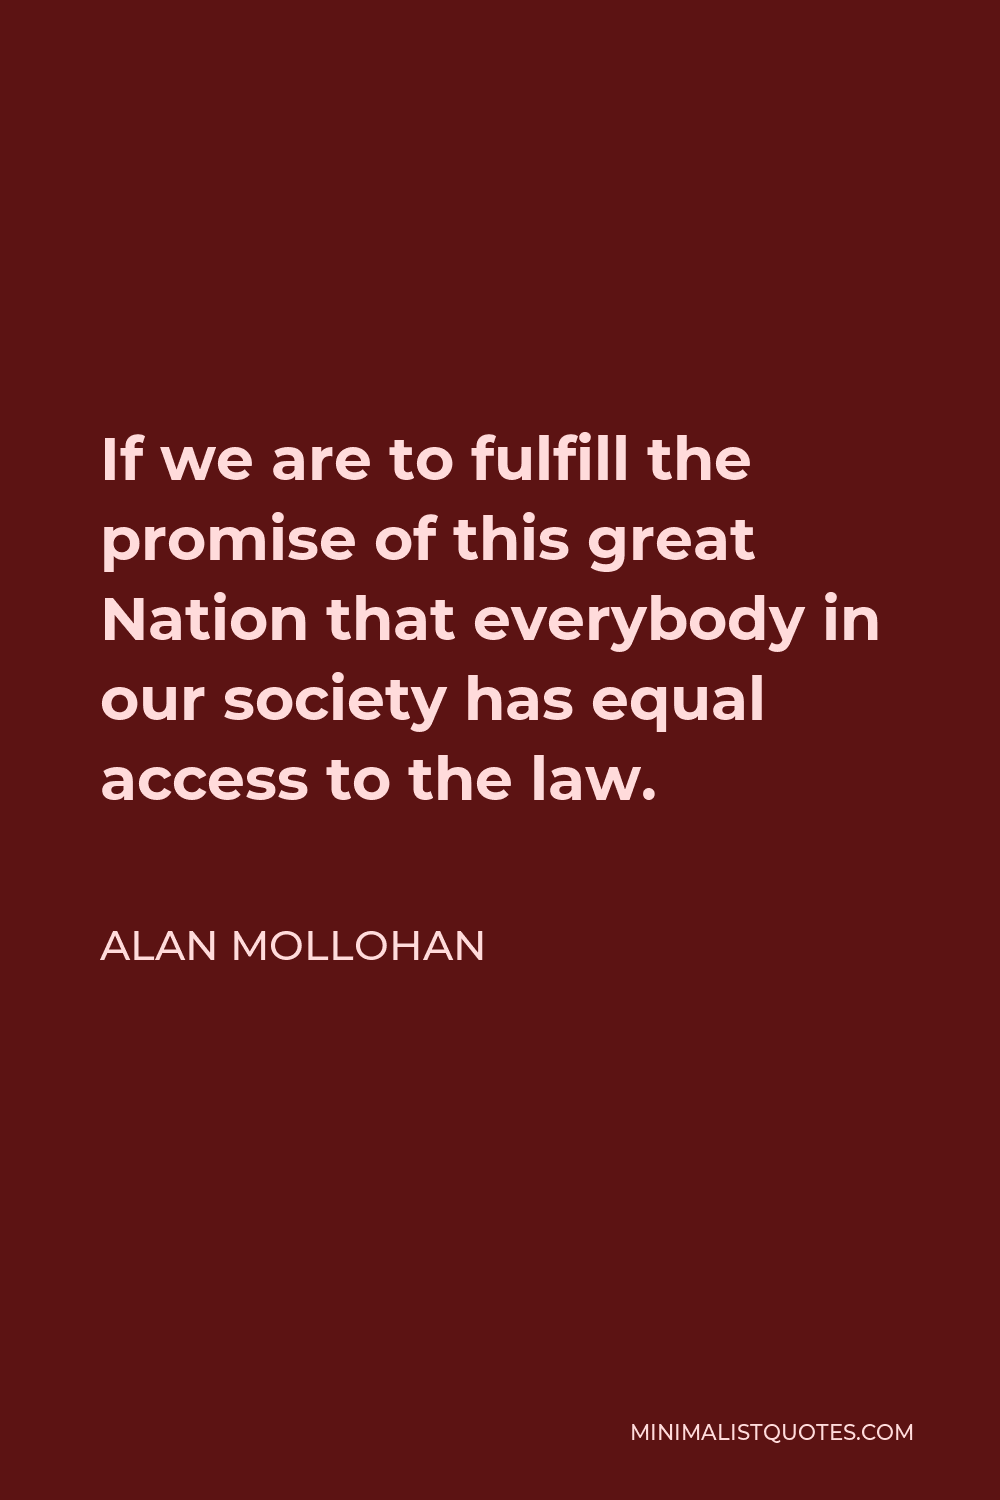 Alan Mollohan Quote - If we are to fulfill the promise of this great Nation that everybody in our society has equal access to the law.